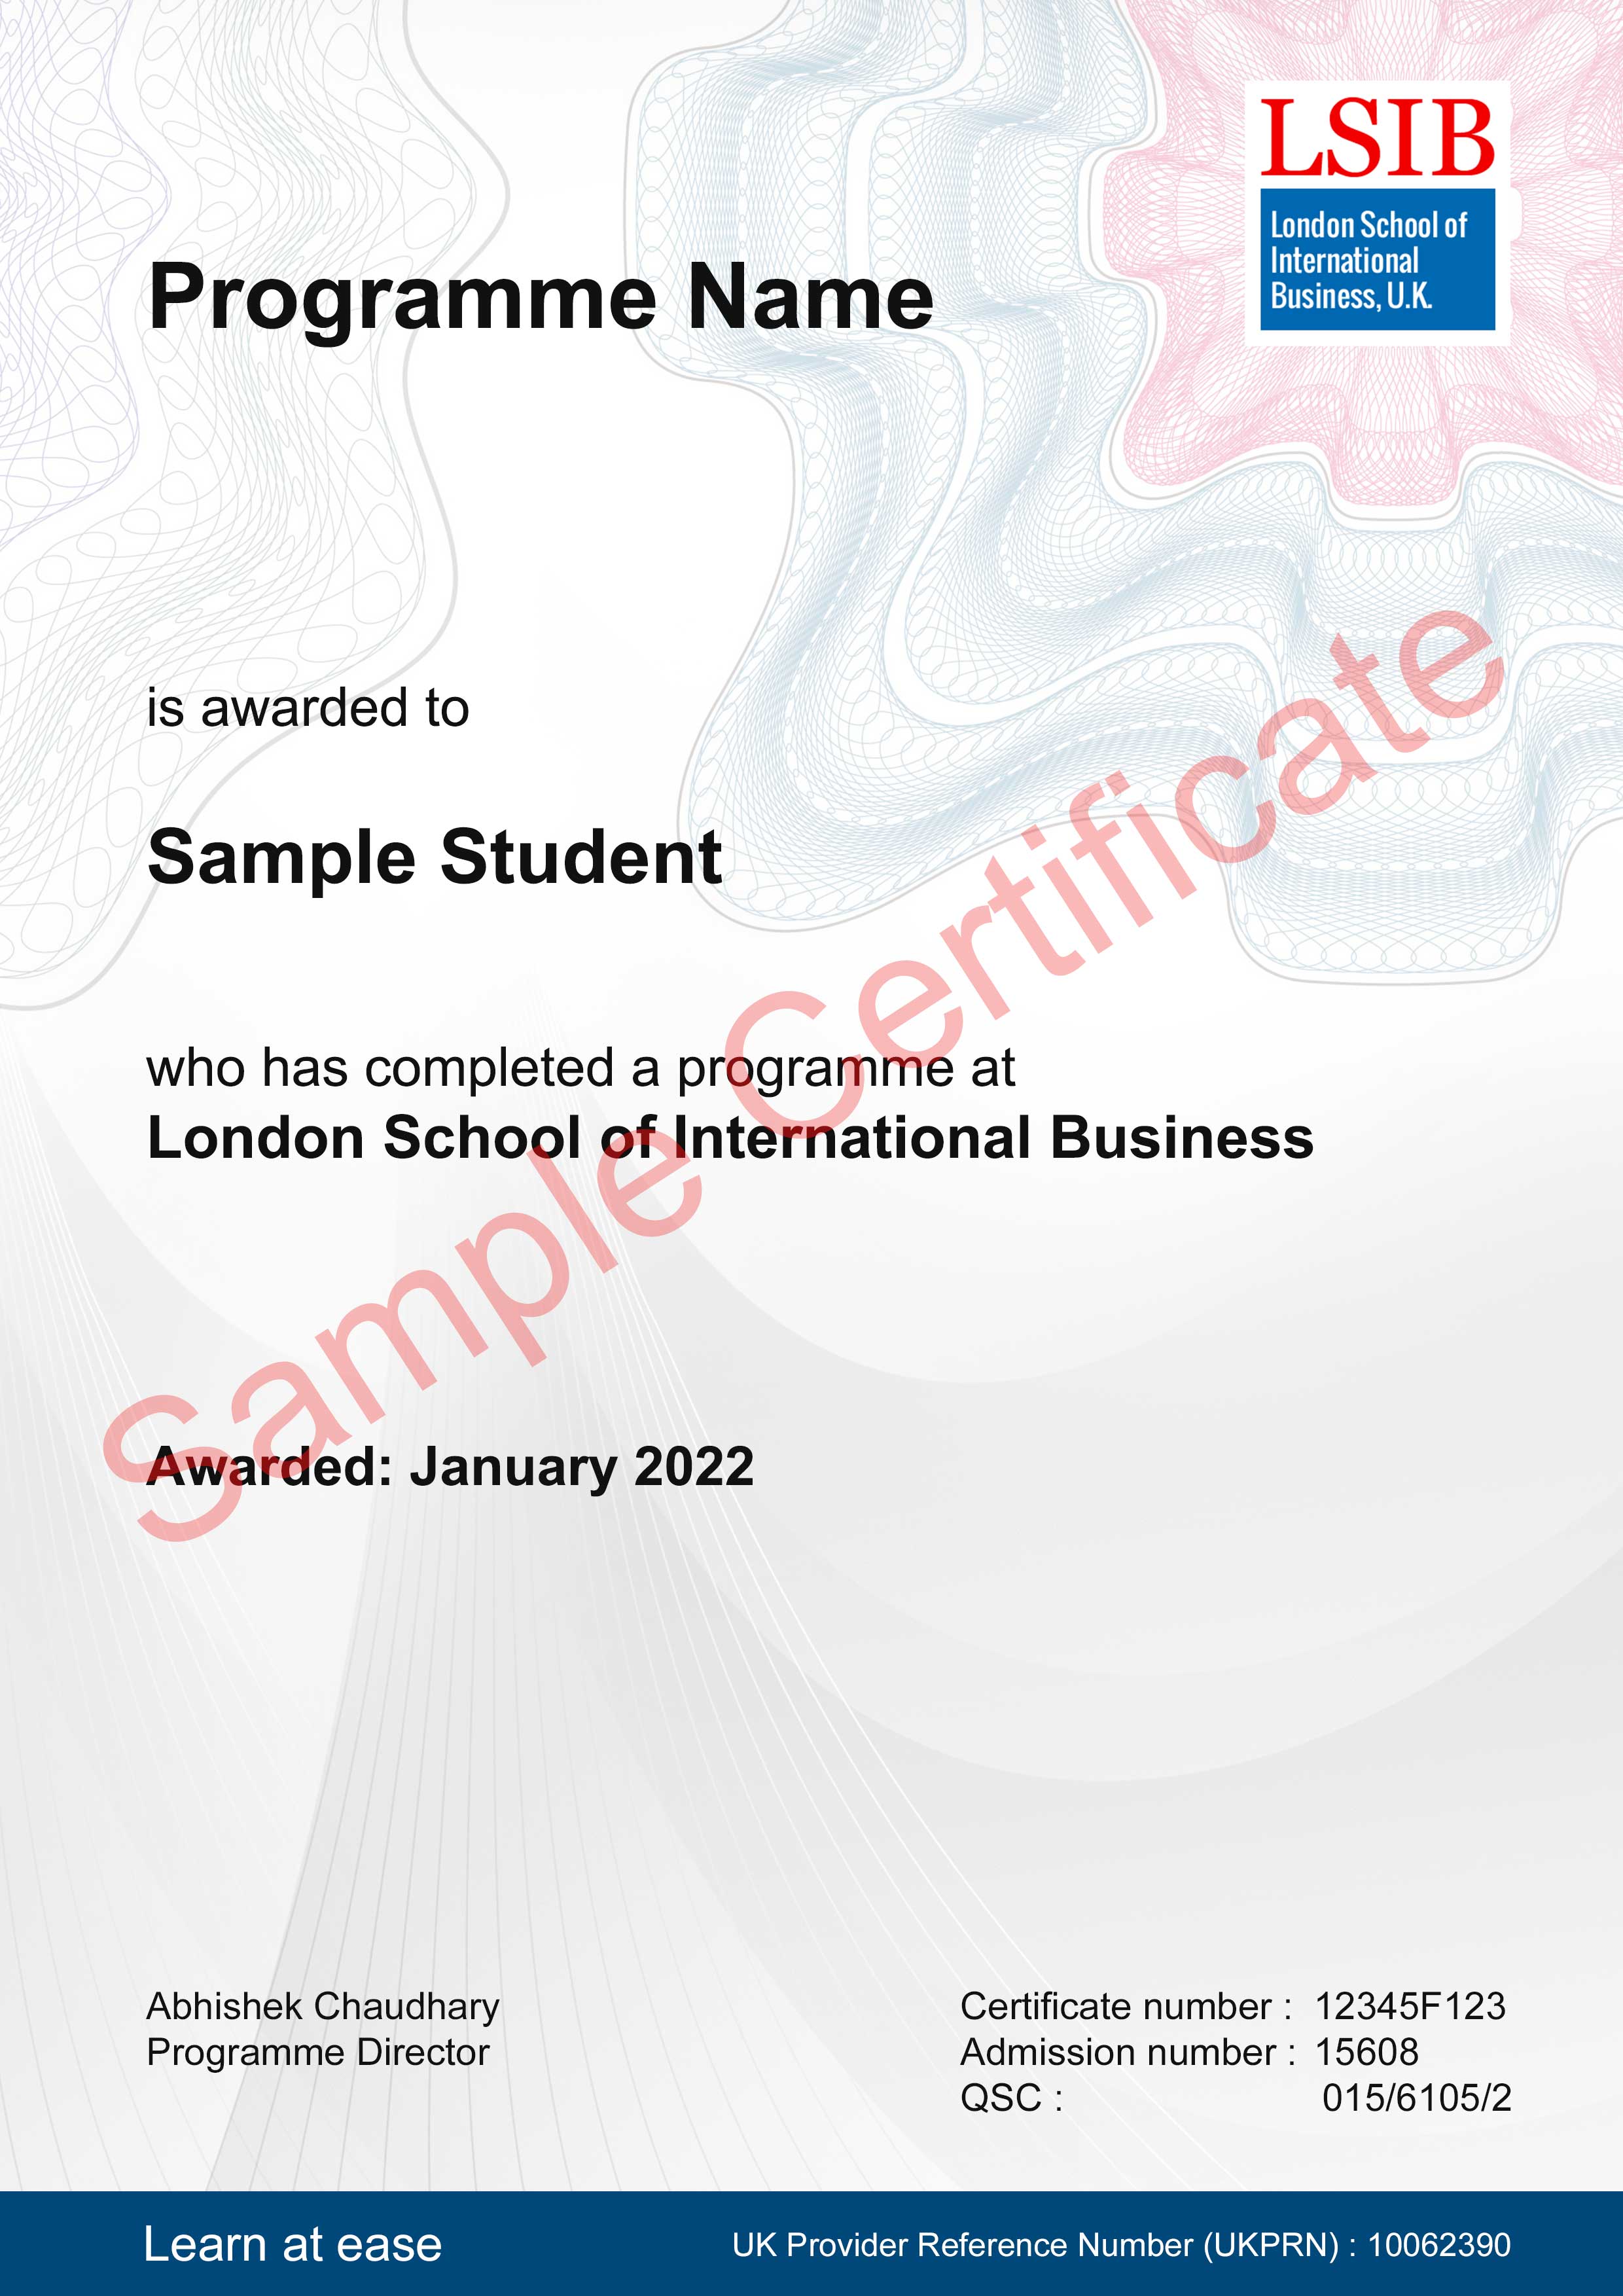 Level 6 Diploma in Logistics and Supply Chain Management